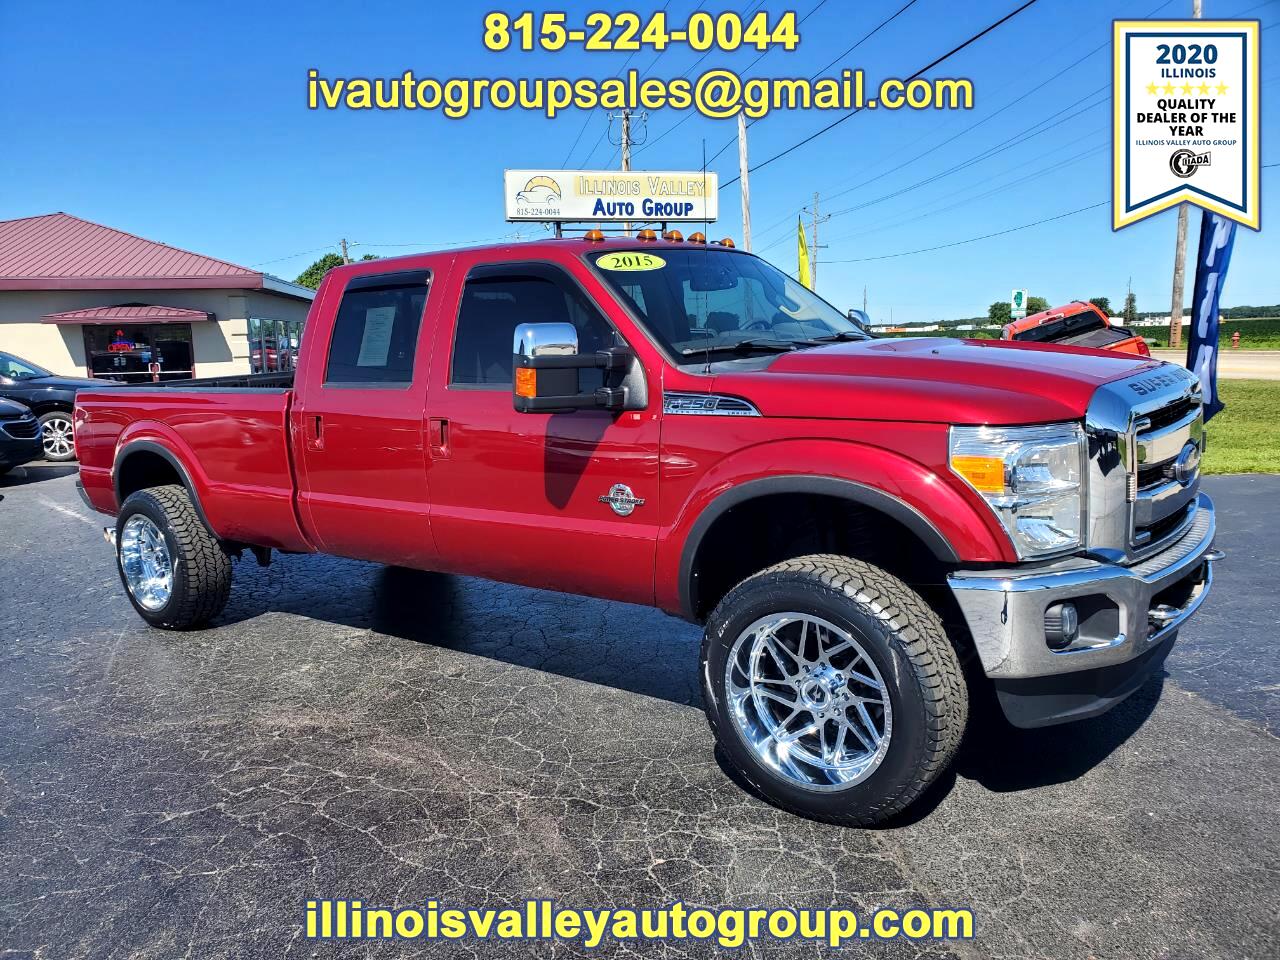 Ford F-250 SD Lariat Crew Cab Long Bed 4WD 2015